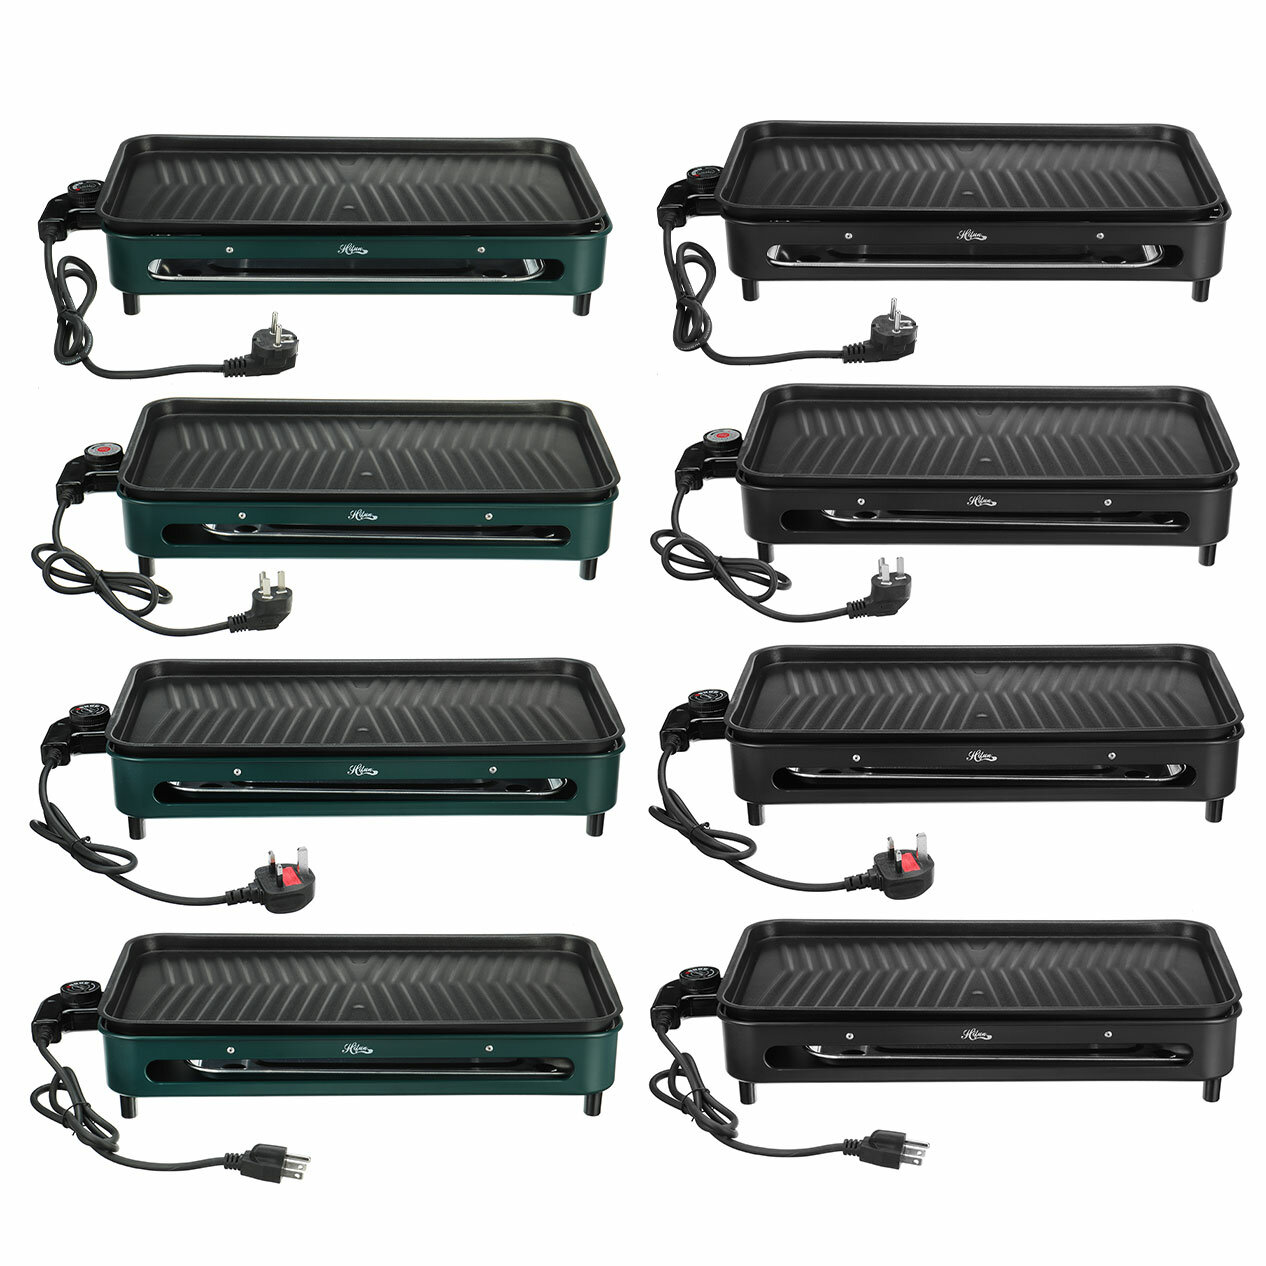 1500W 110V/220V Nonstick Electric Indoor Smokeless Grill Portable BBQ Grills with Recipes, Fast Heat